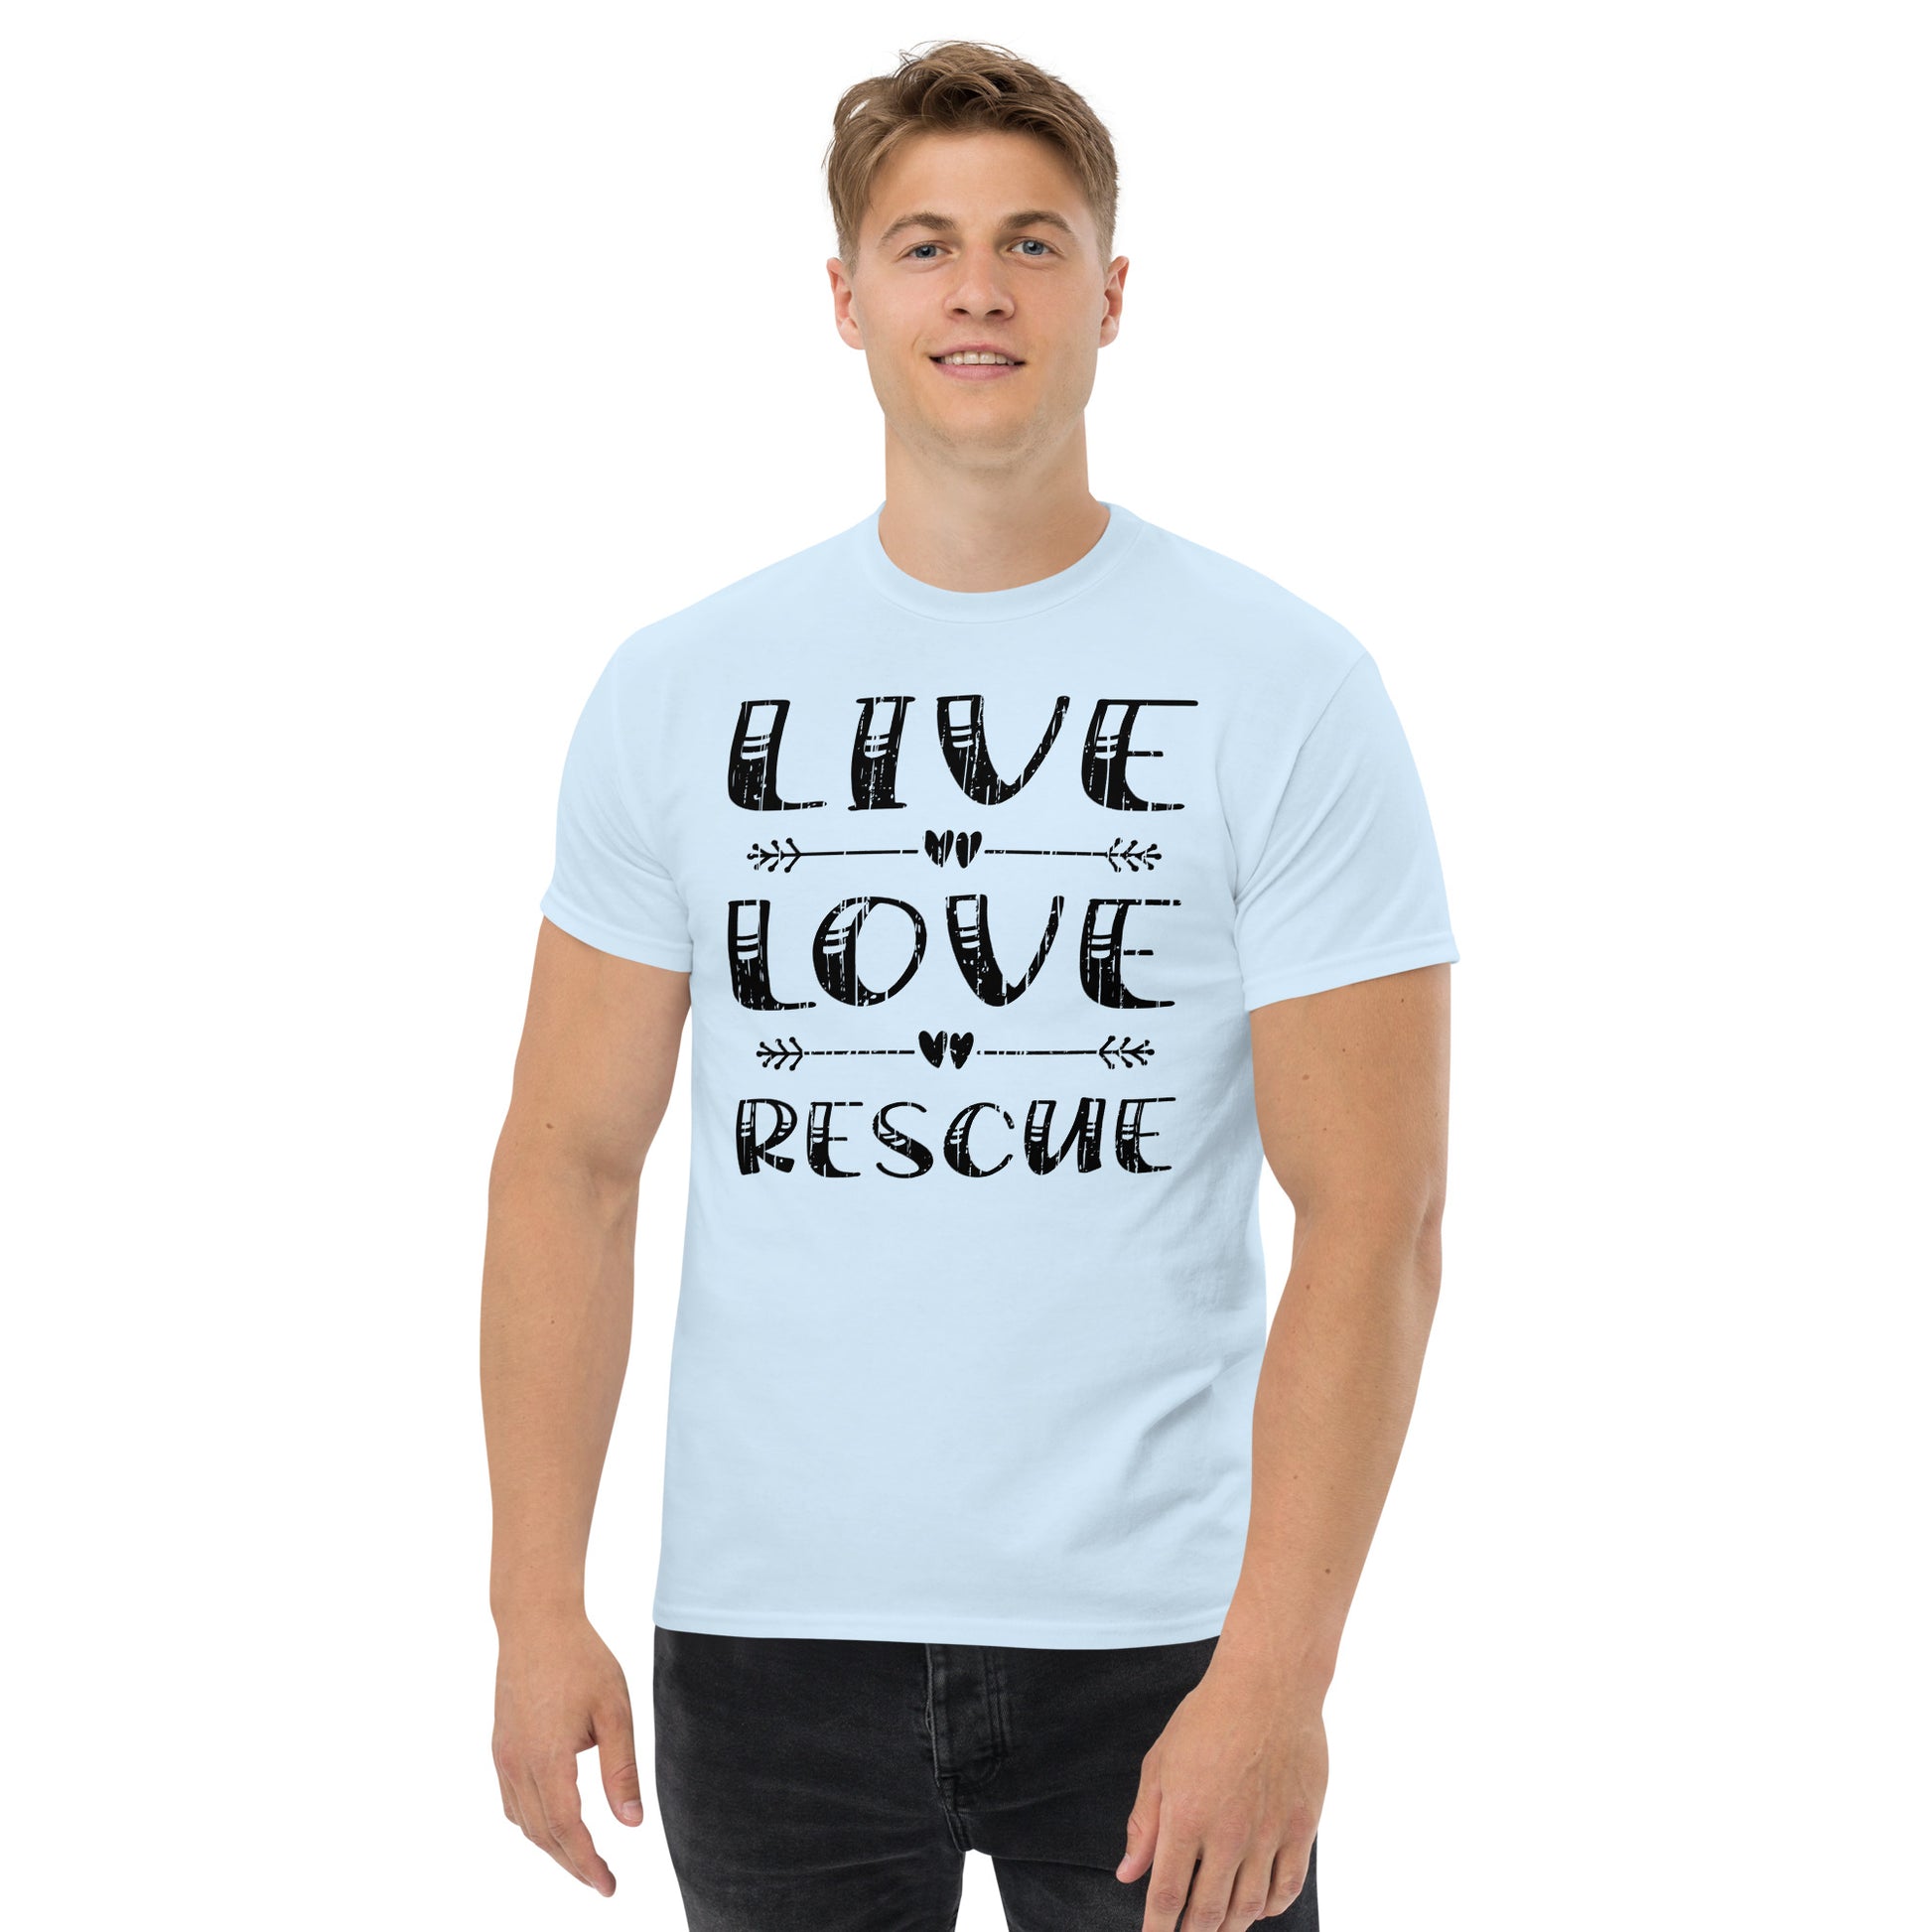 Live love rescue men’s t-shirts by Dog Artistry light blue color